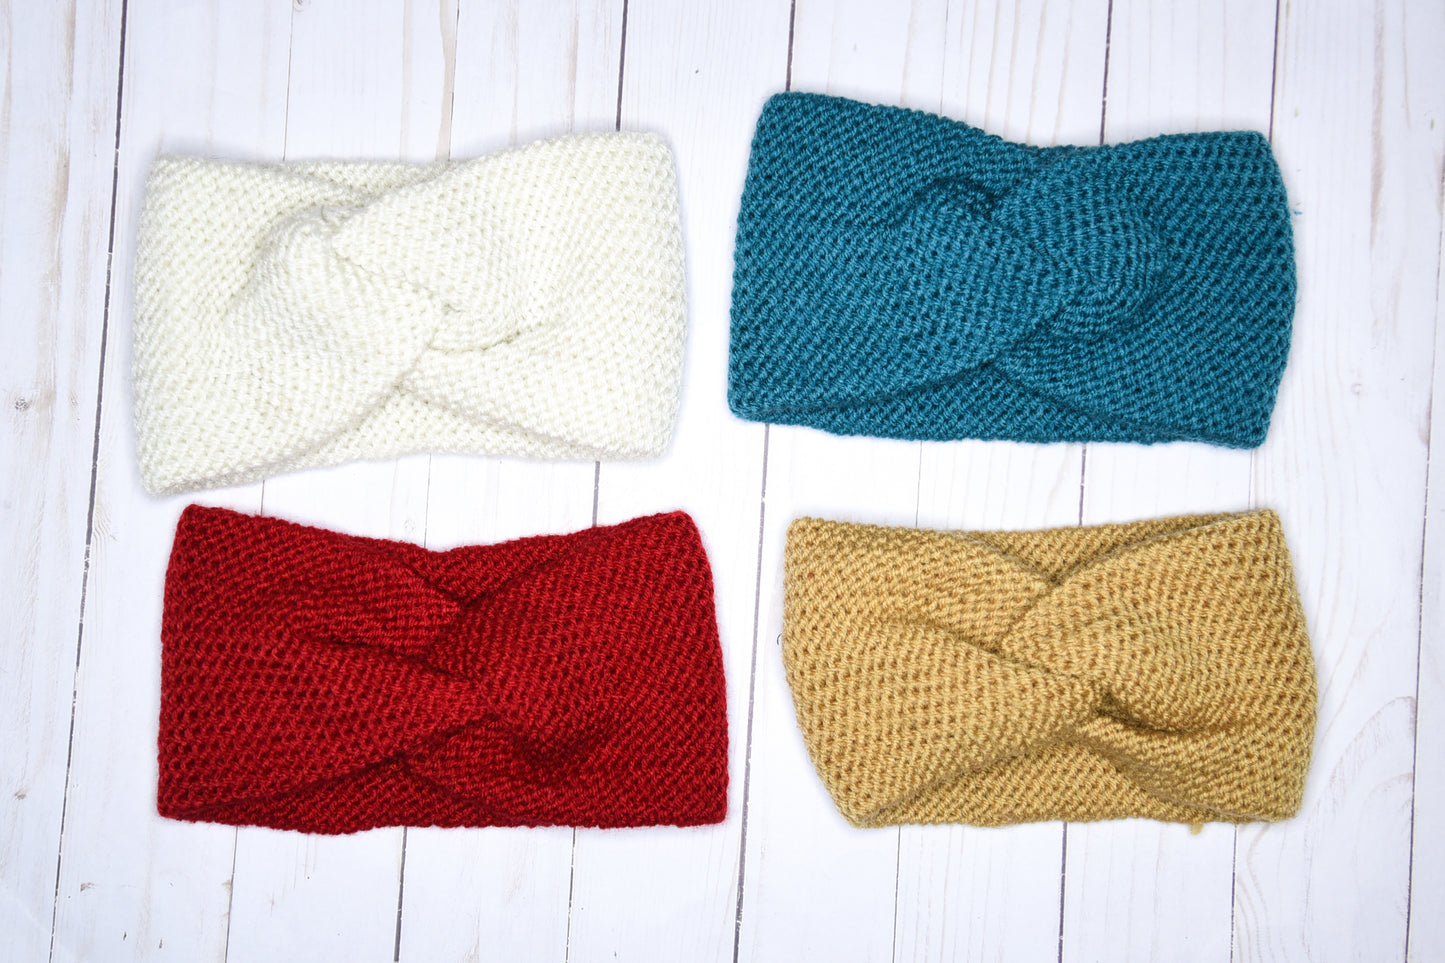 Hayley Twisted Knitted Headband - Camel